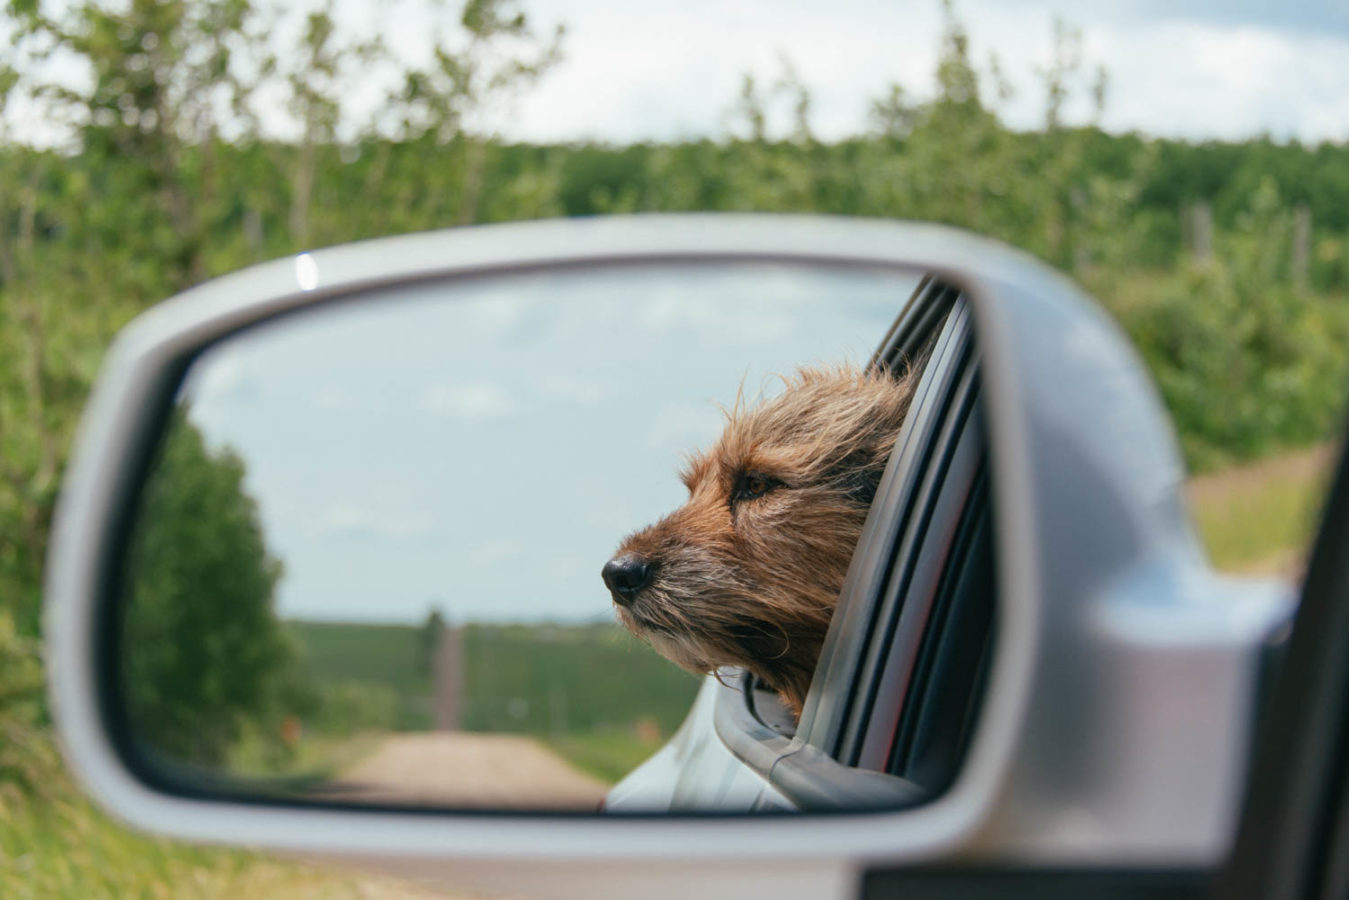 How do you take care of your pets during a heatwave? | Climate Council